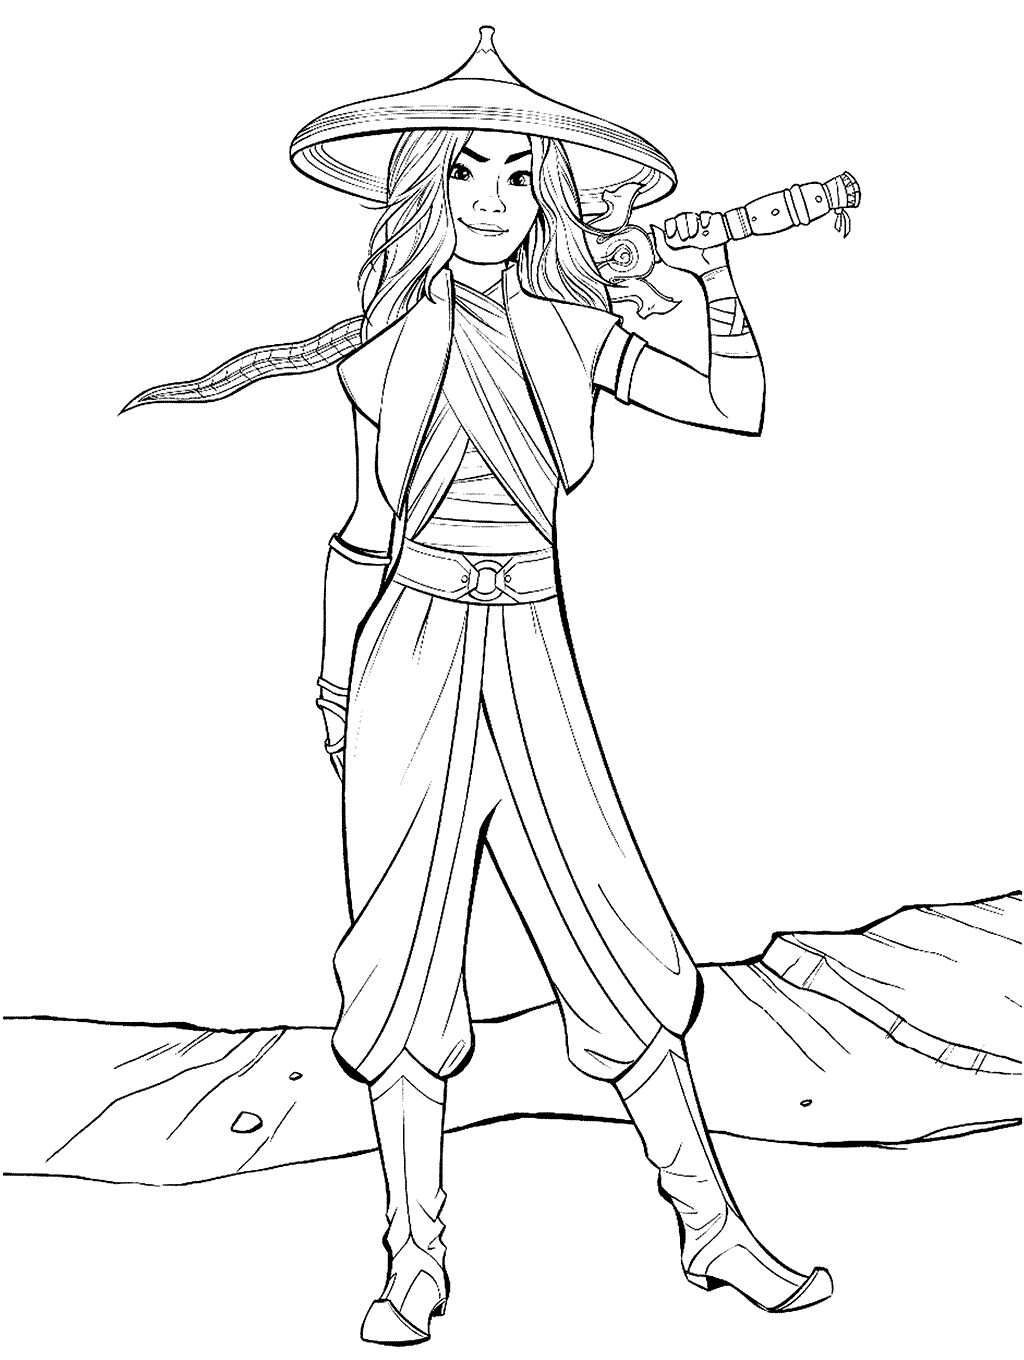 Warrior Raya holds her sword Coloring Page